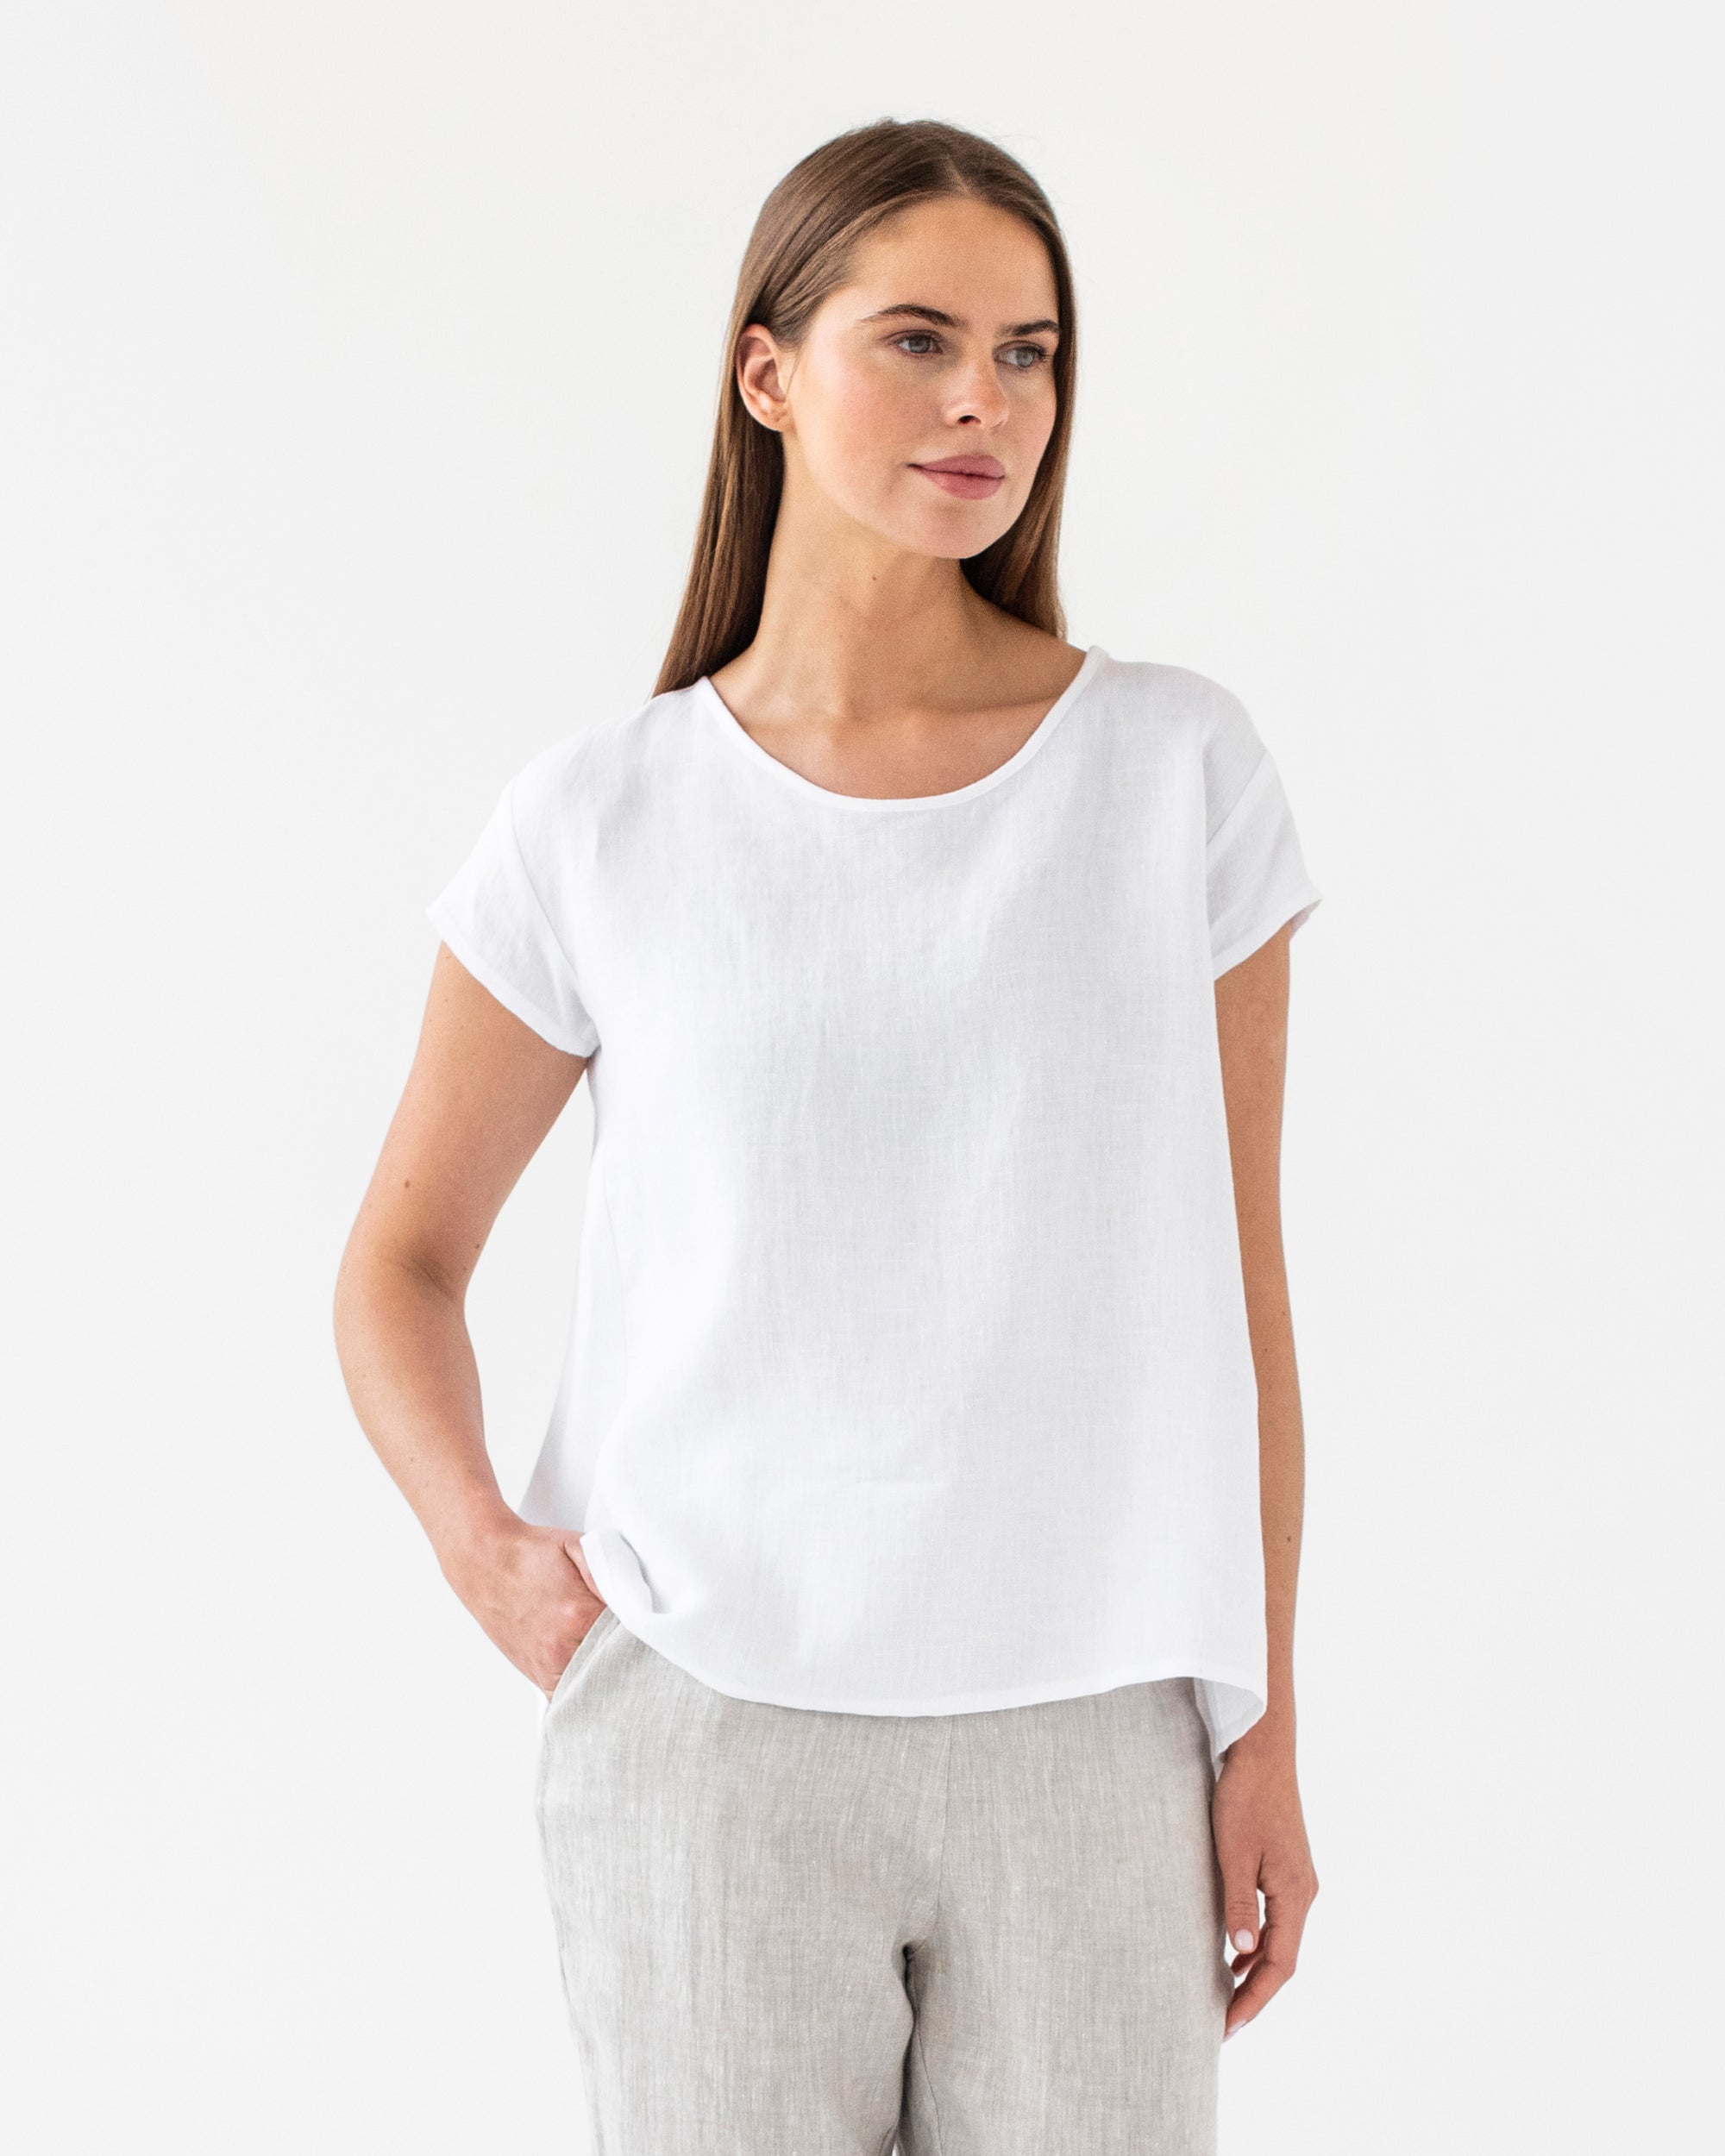 Loose Fit Linen Top TAHOE in White | MagicLinen